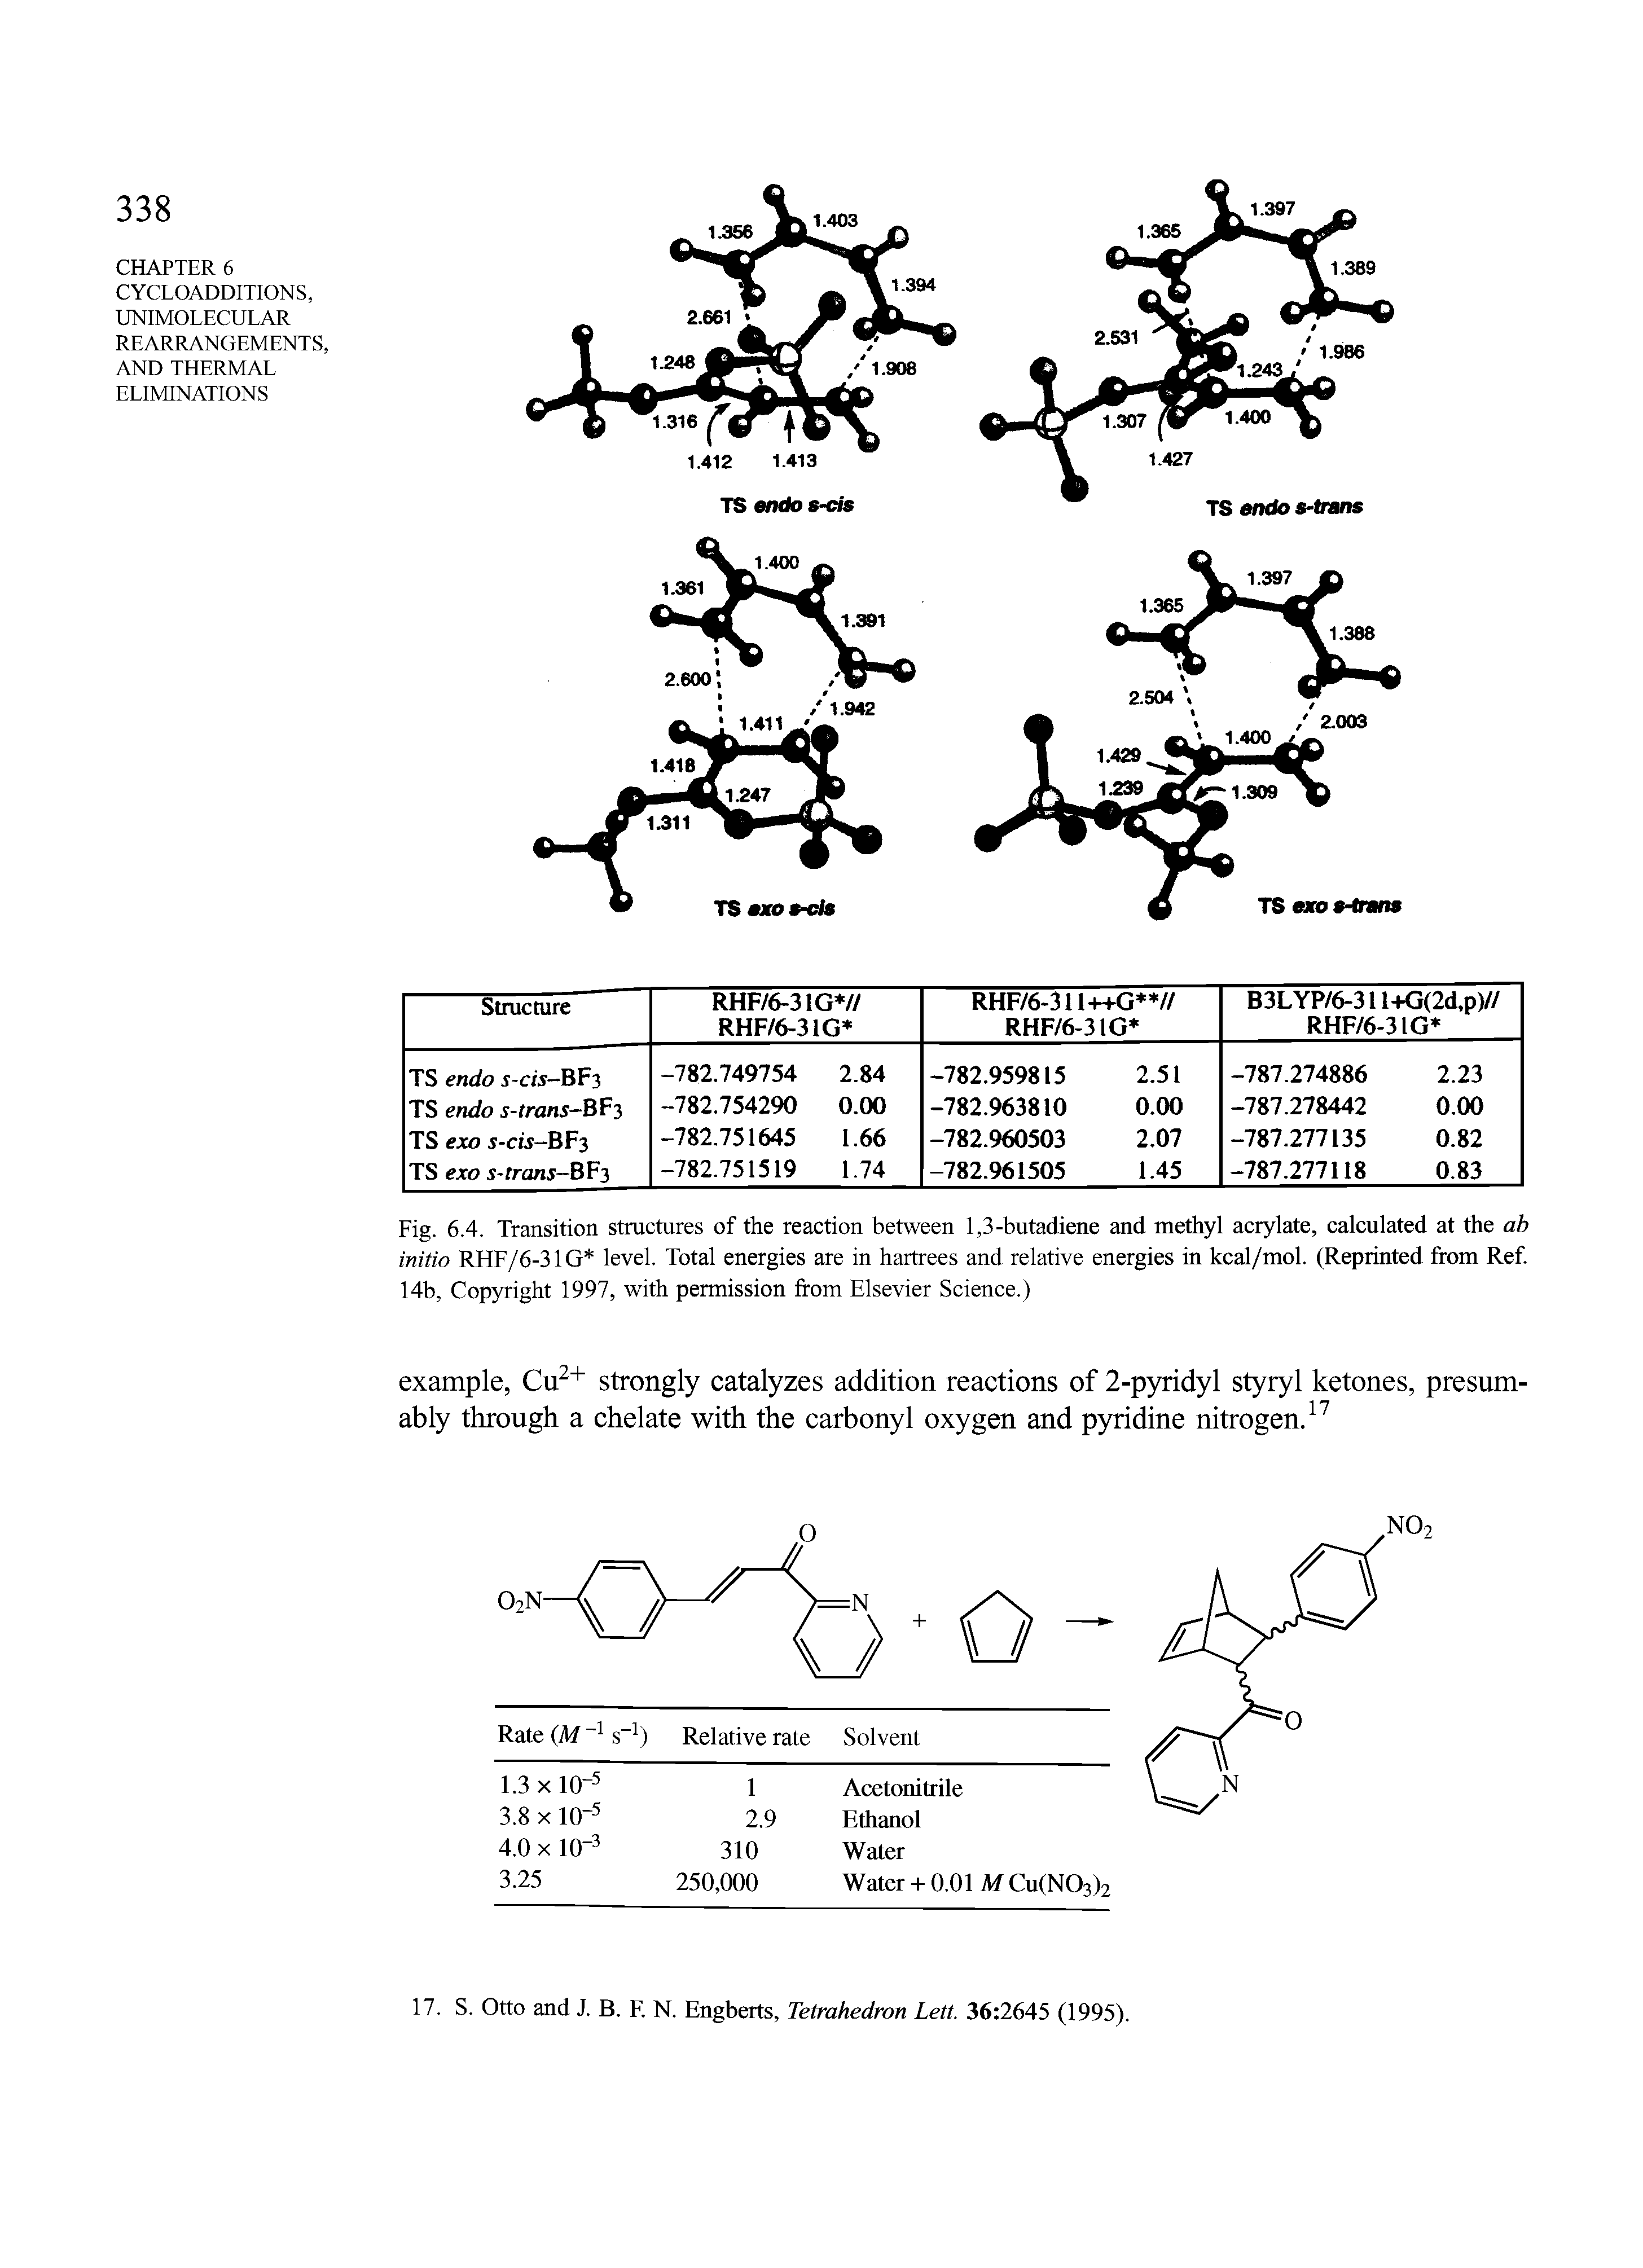 Fig. 6.4. Transition structures of the reaction between 1,3-butadiene and methyl acrylate, calculated at the ab initio RHF/6-31G level. Total energies are in hartrees and relative energies in kcal/mol. (Reprinted from Ref. 14b, Copyright 1997, with permission from Elsevier Science.)...